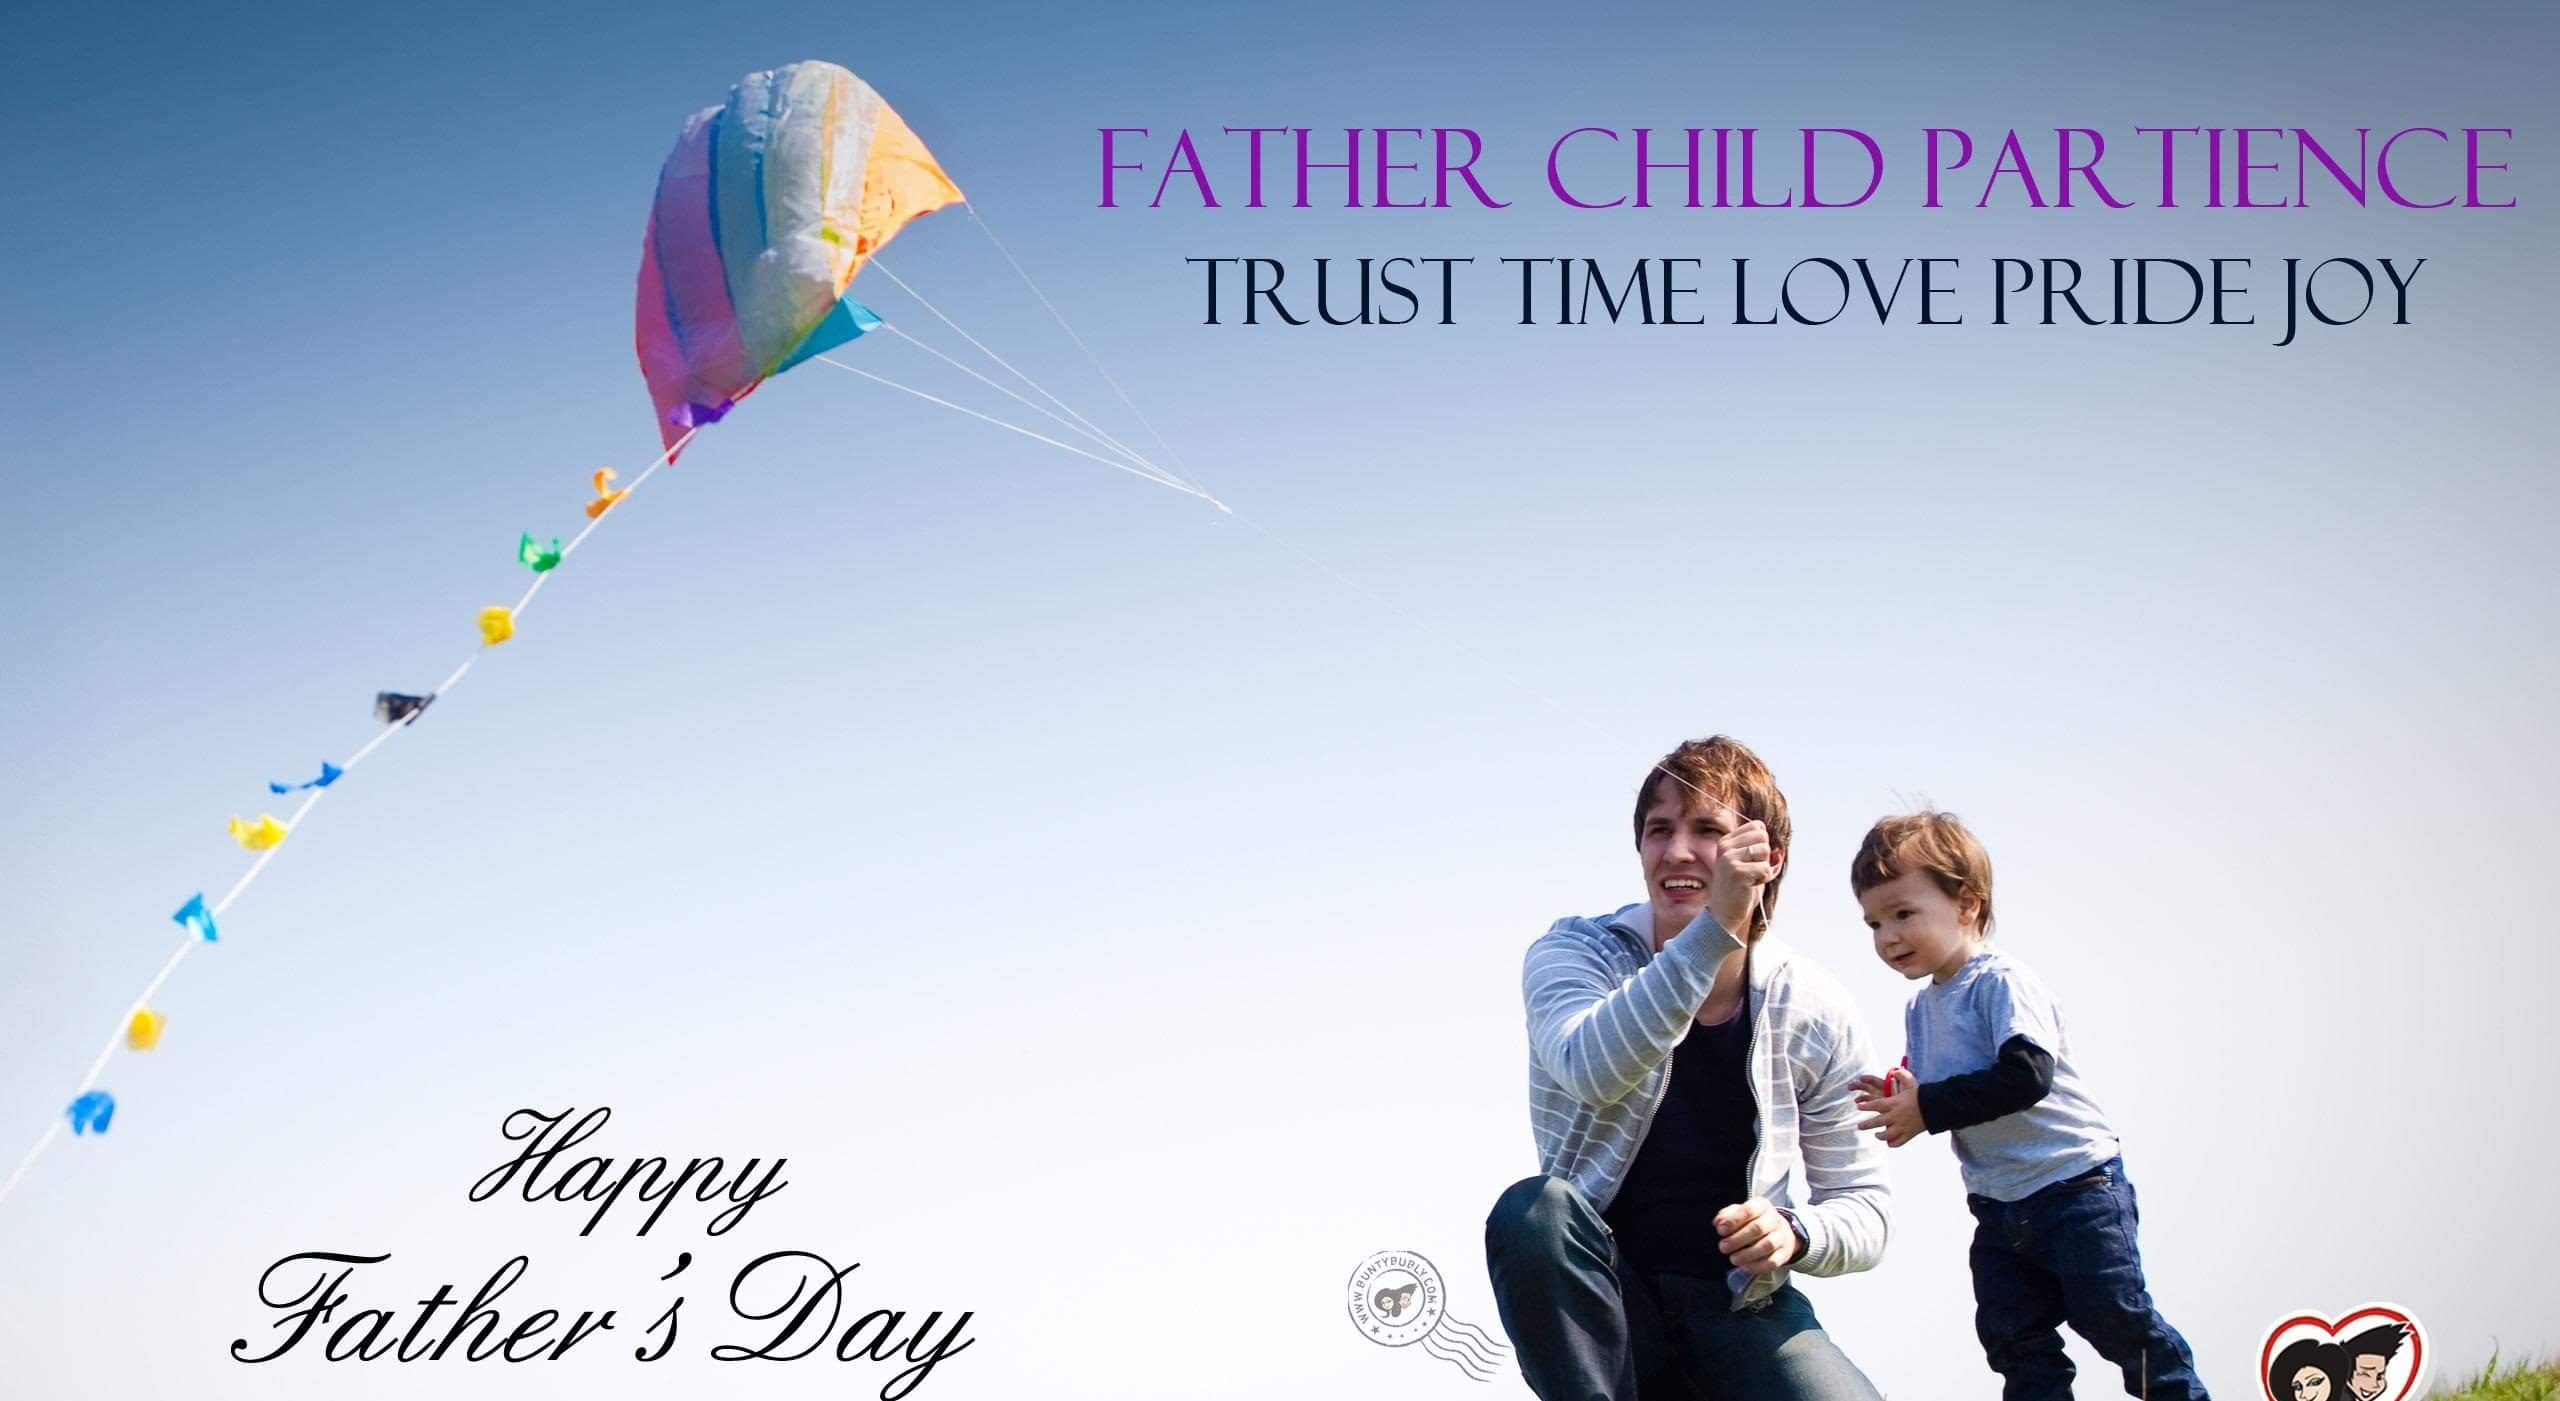 Fathers Day Wallpaper 3d - March 19 Father's Day - HD Wallpaper 